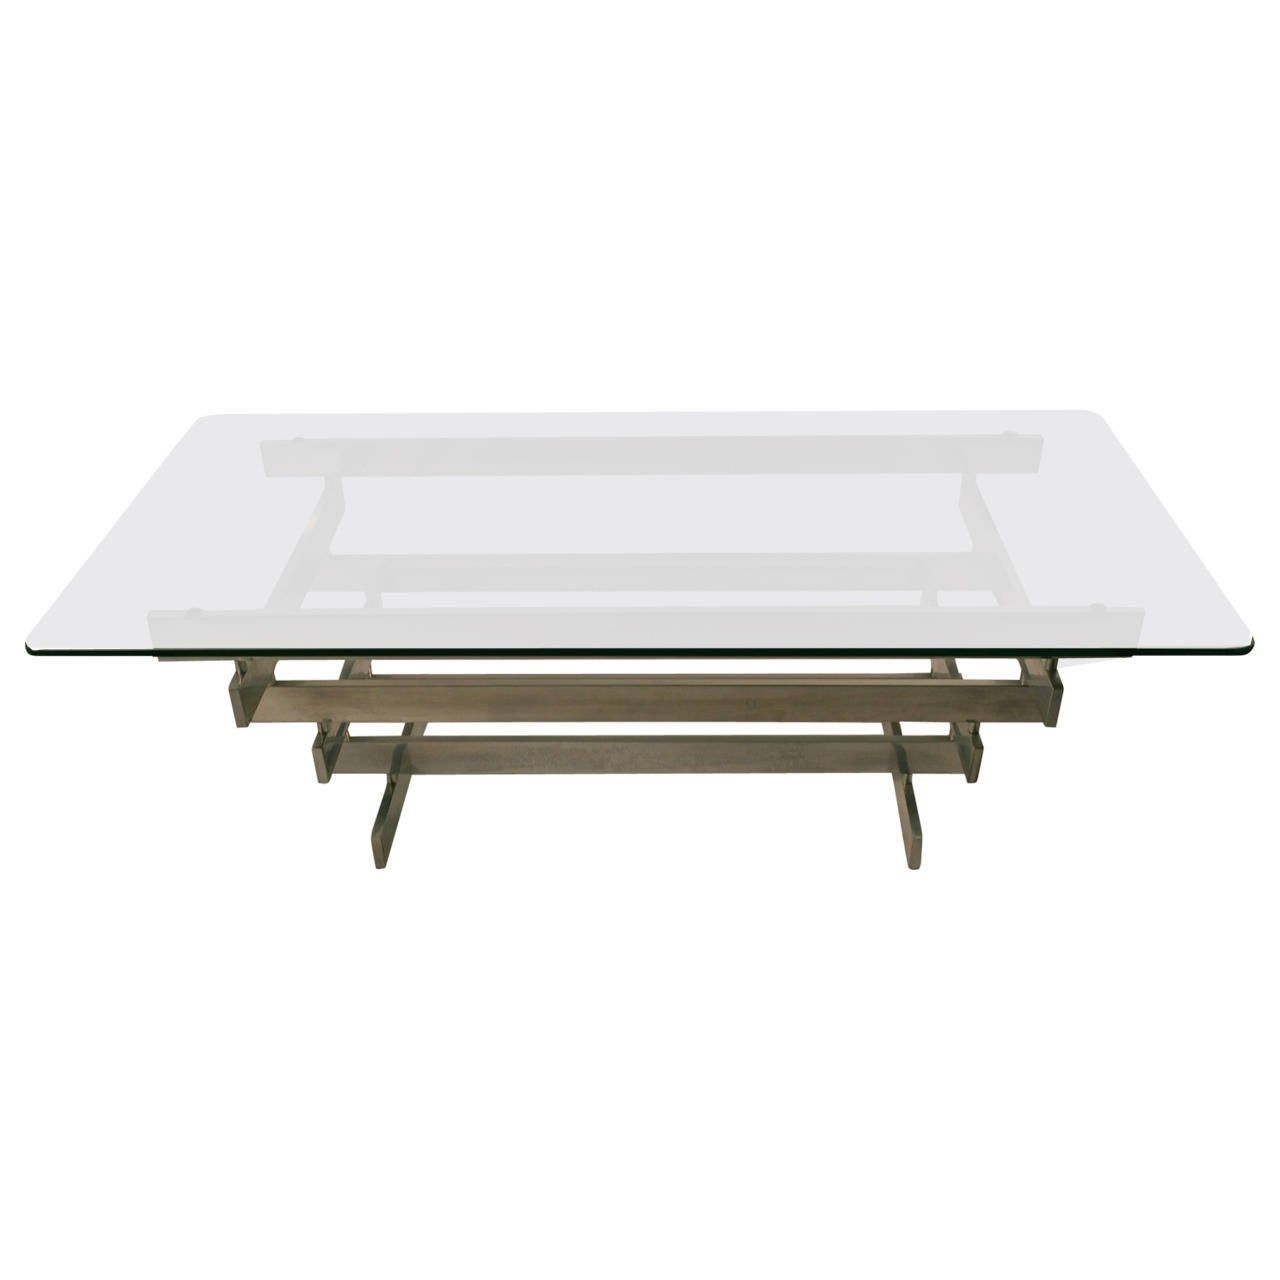 Stacked Aluminum Block Base Glass Top Coffee Table For Sale At 1stdibs Throughout Large Frosted Glass Aluminum Desks (View 2 of 15)